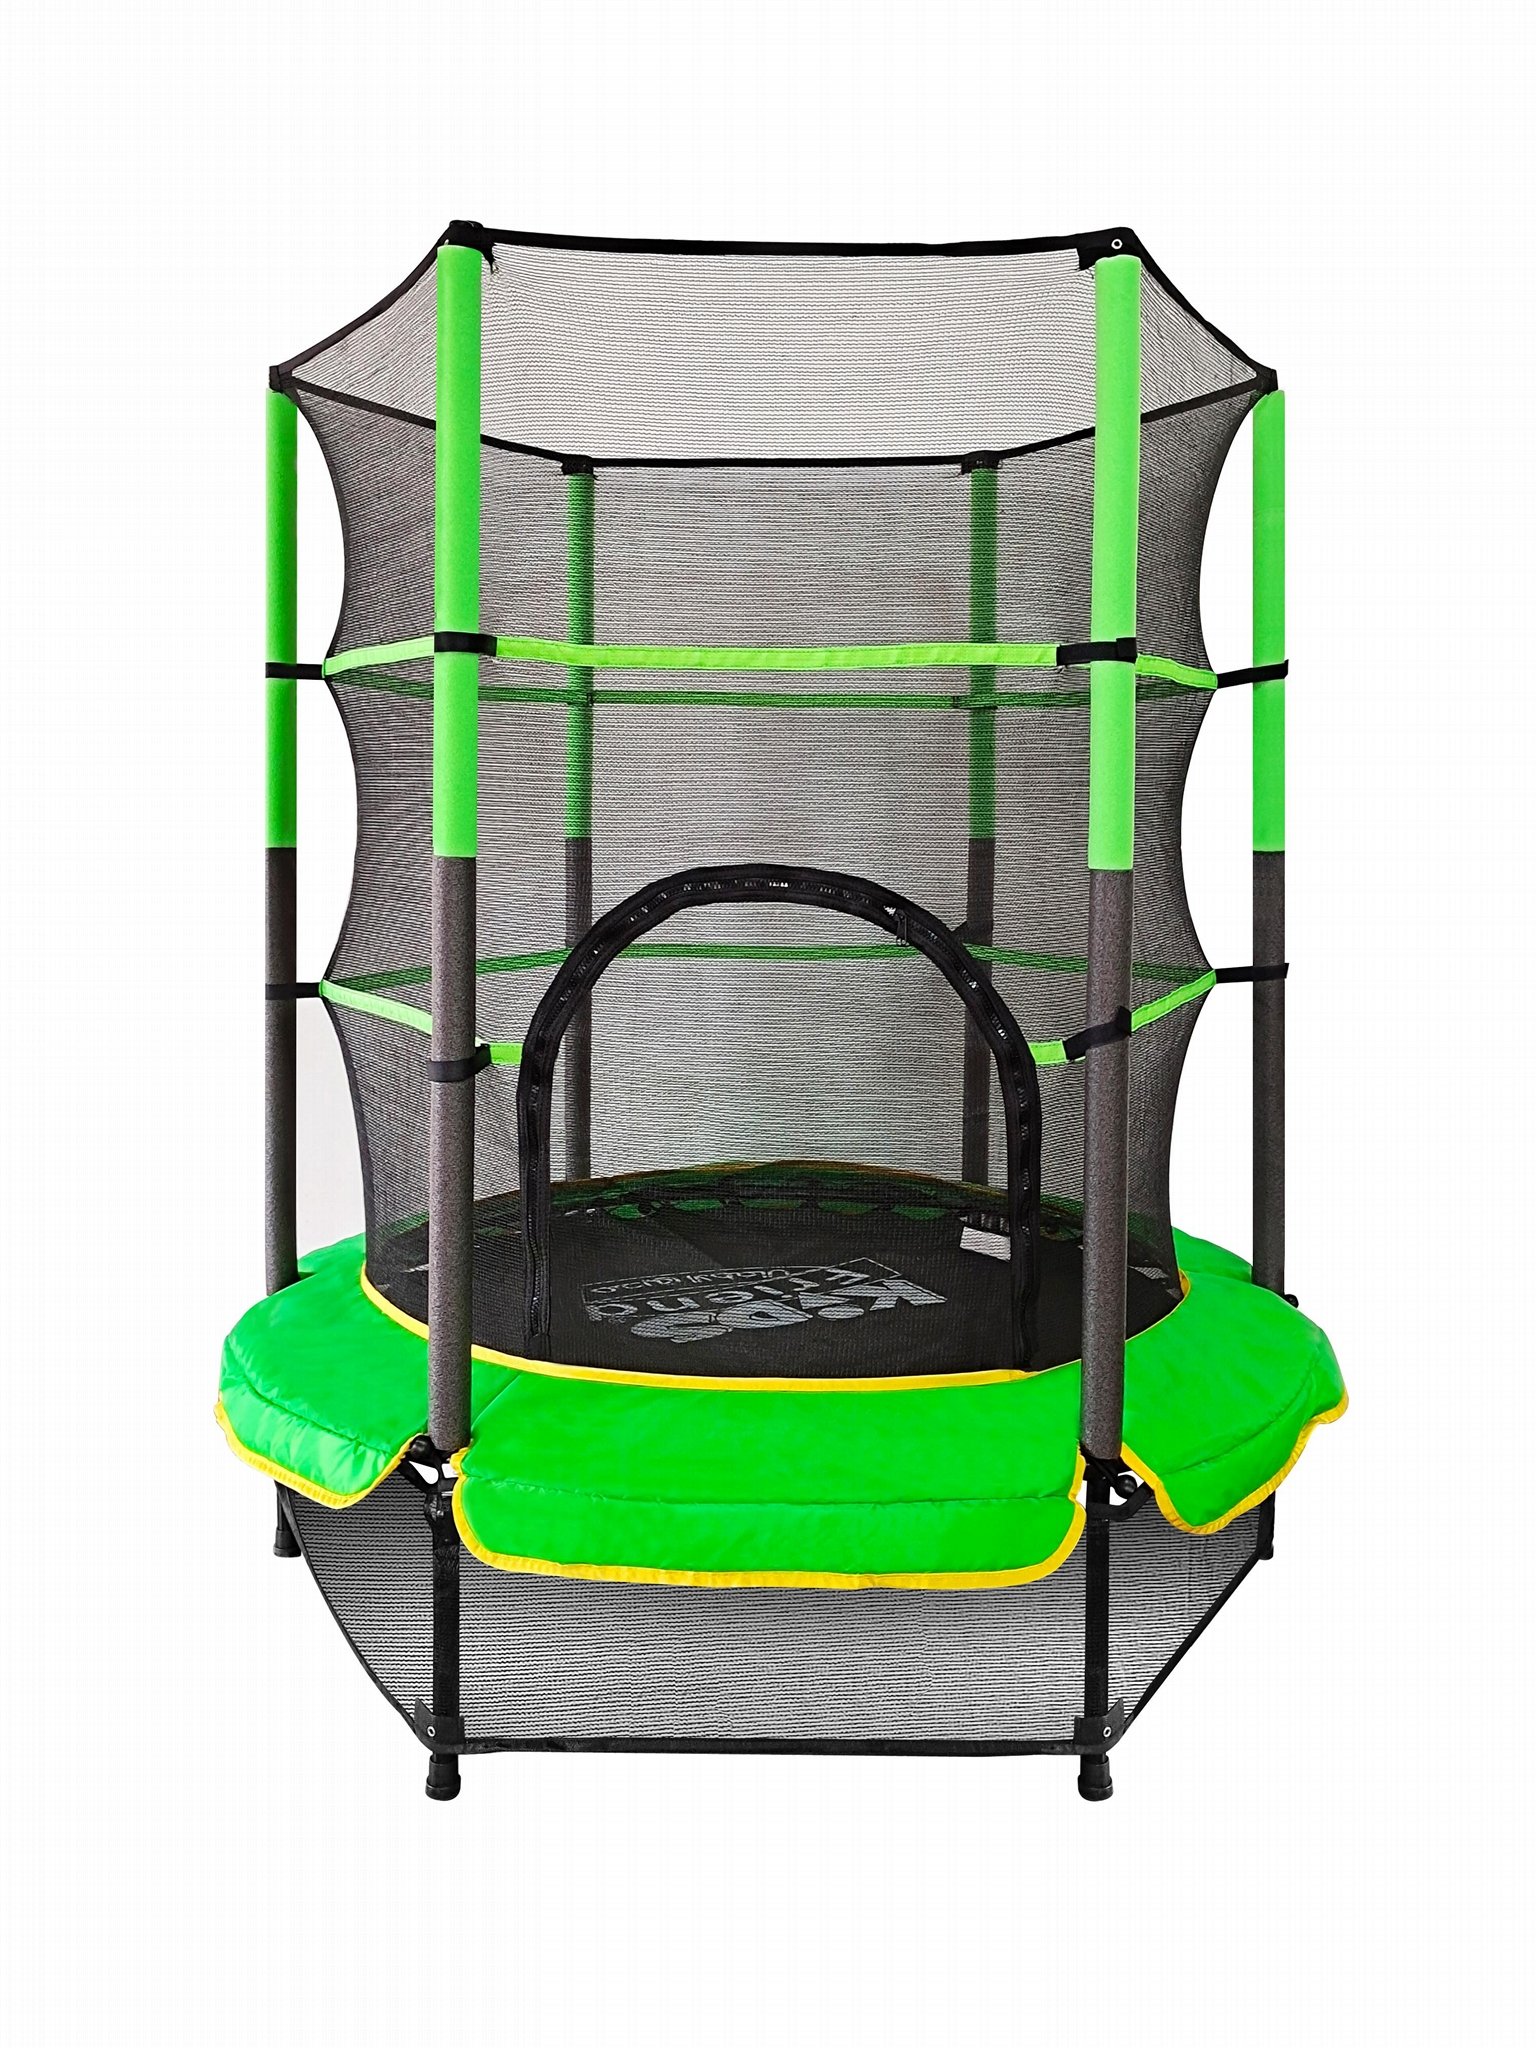 Hot sale 54 inch indoor trampoline with safety net for kids 